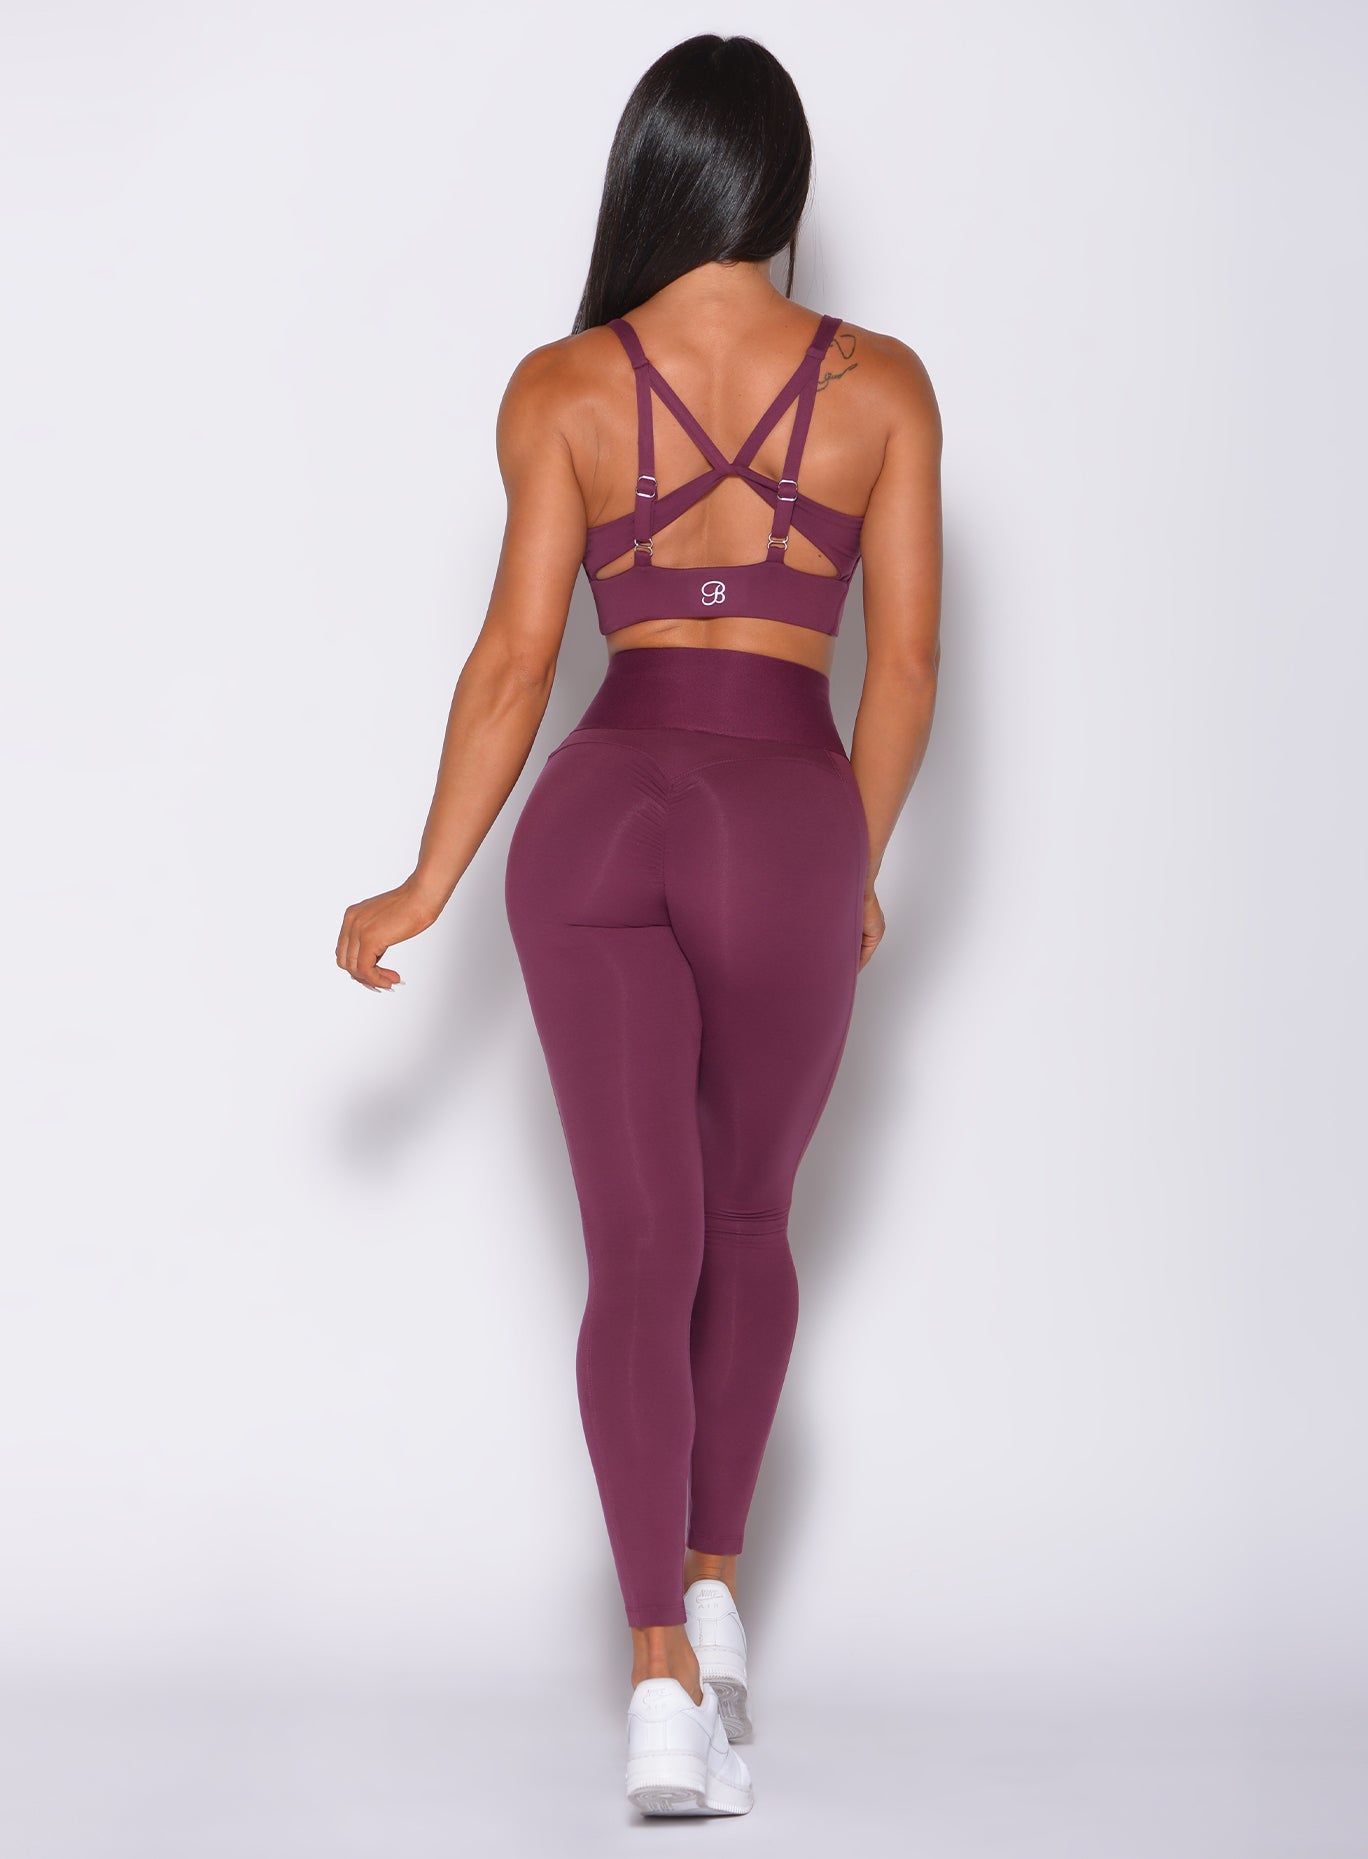 Back  profile view of a model in our waist cincher leggings in majestic purple color and a matching bra